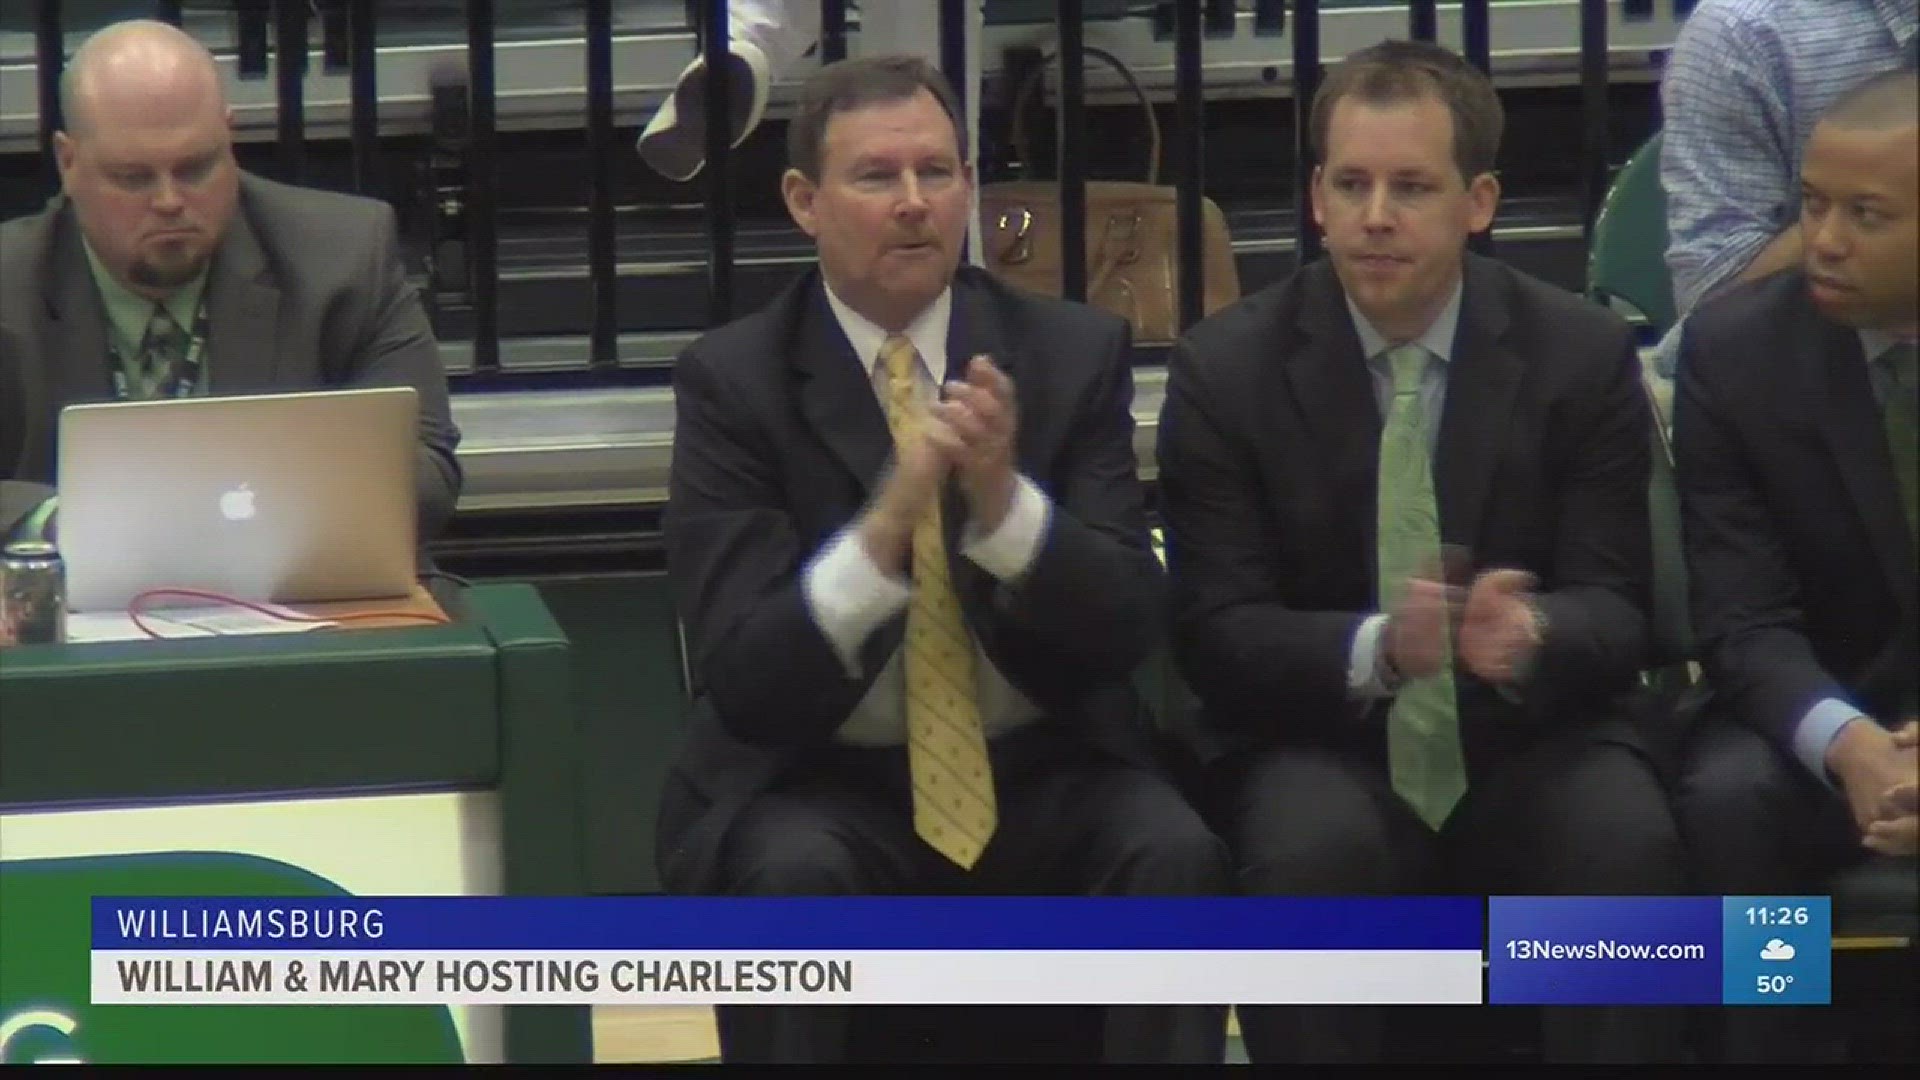 William & Mary got a career high of 30 points from David Cohn on Senior Day as they won over Charleston 114-104.